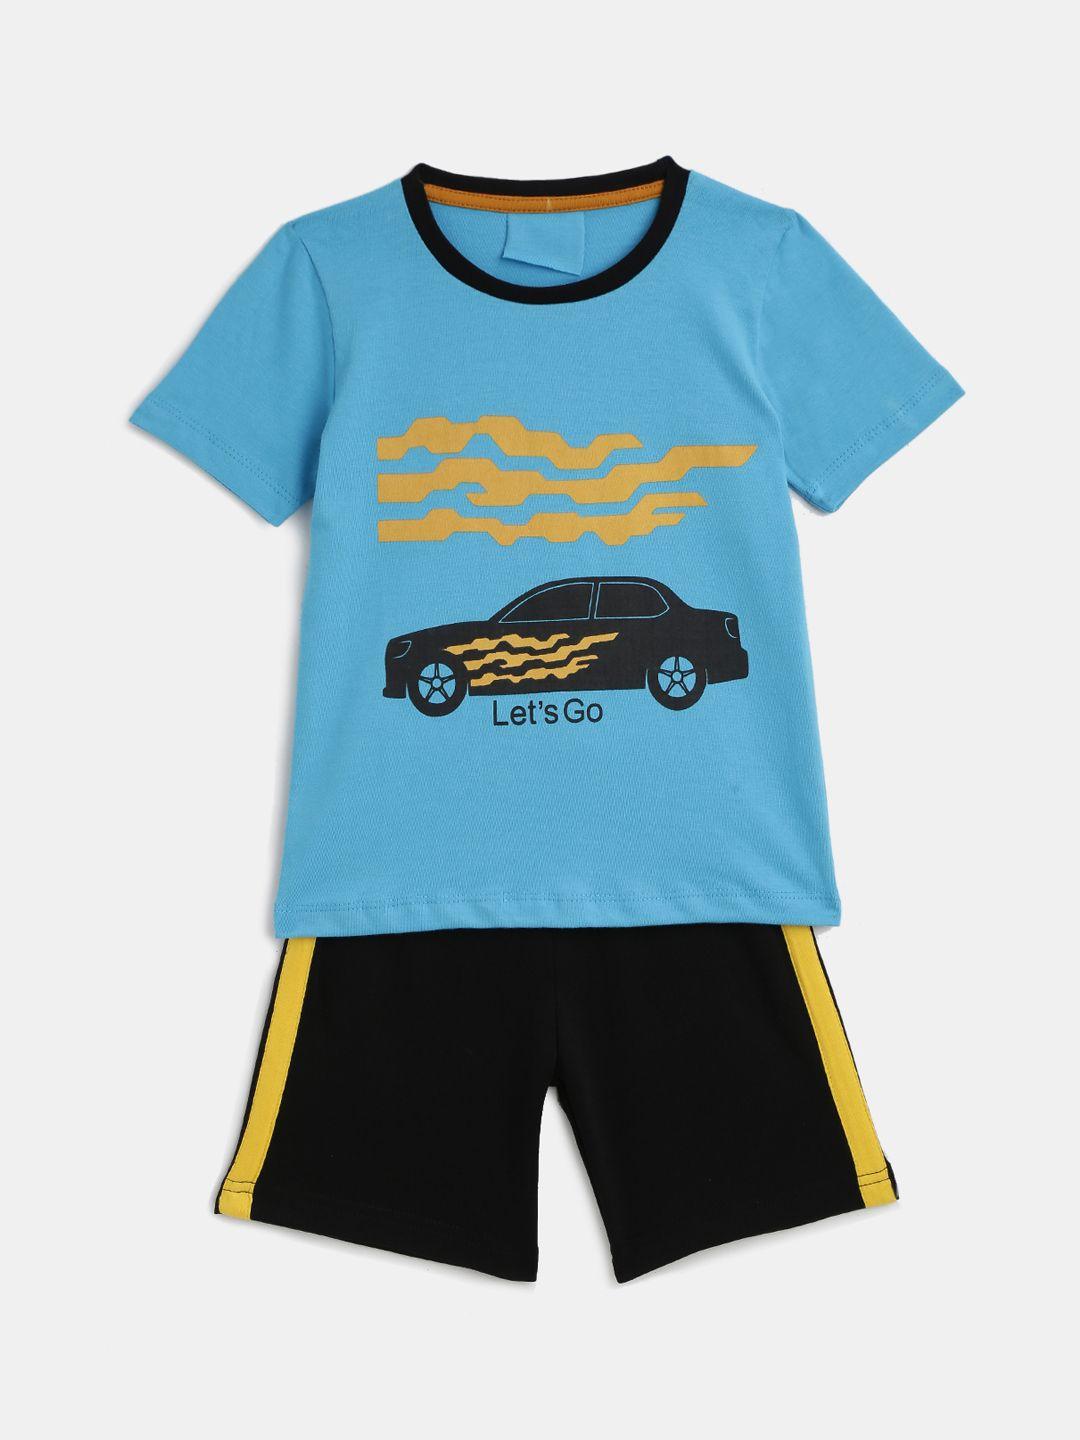 kidscraft boys turquoise blue & black printed t-shirt with shorts